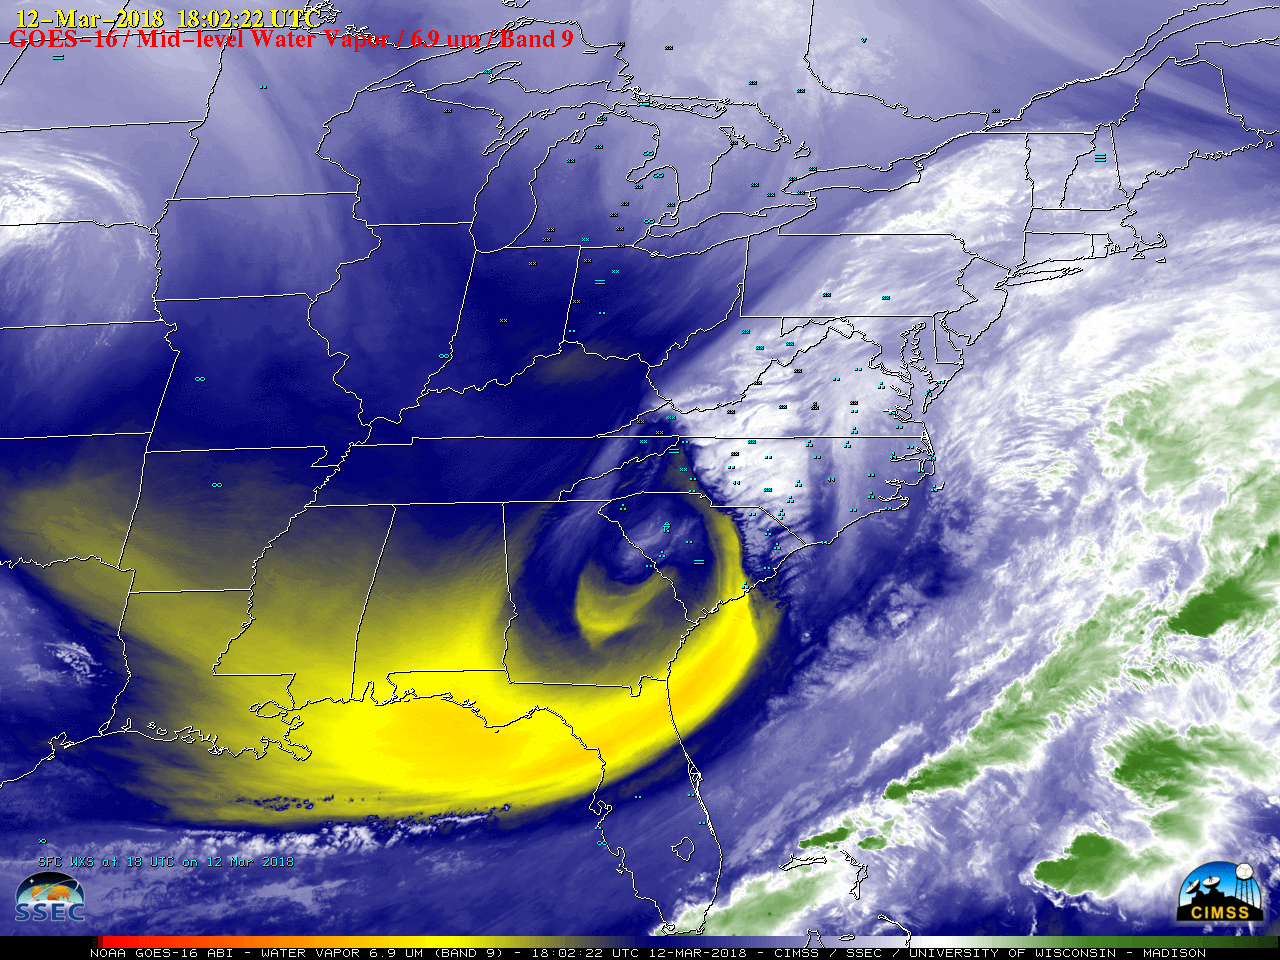 GOES-16 Mid-level (6.9 µm) Water Vapor images, with plots of hourly surface weather symbols [click to play MP4 animation]